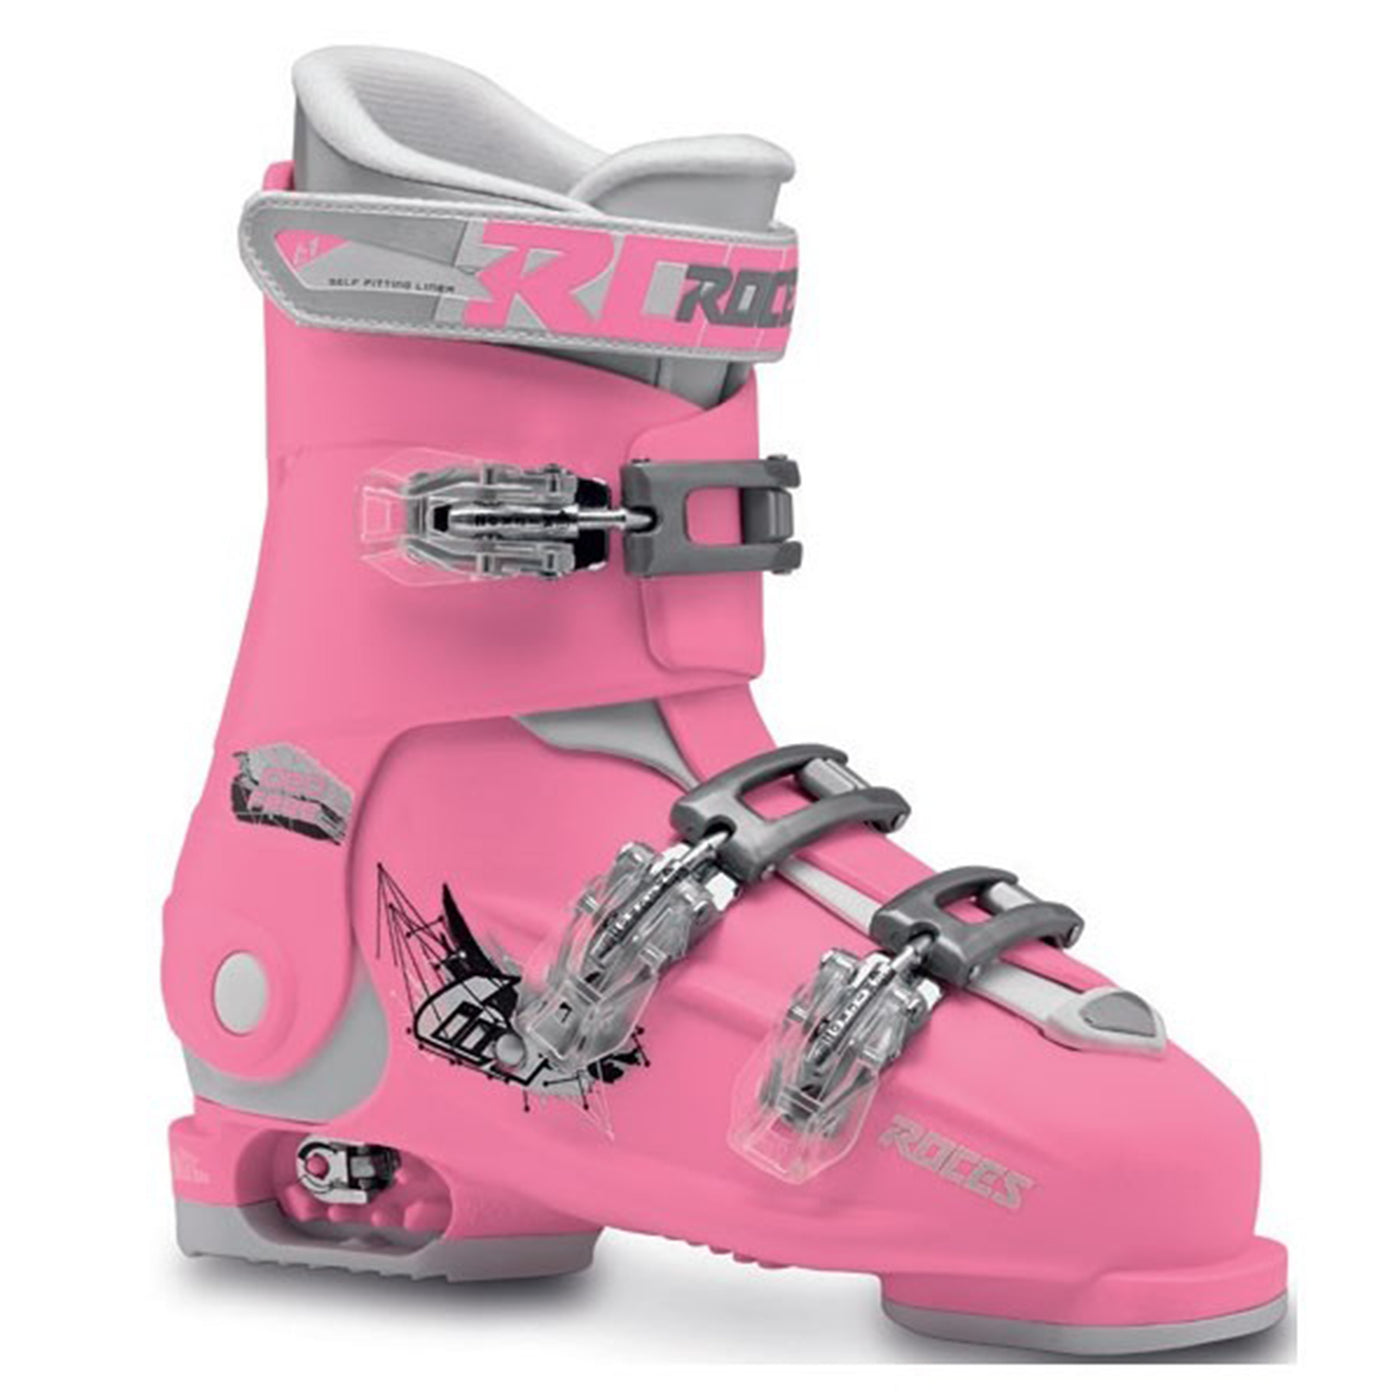 Roces IDEA Free Adjustable Youth Ski Boots | Size 22.5 - 25.5 MP SKI BOOTS Roces   